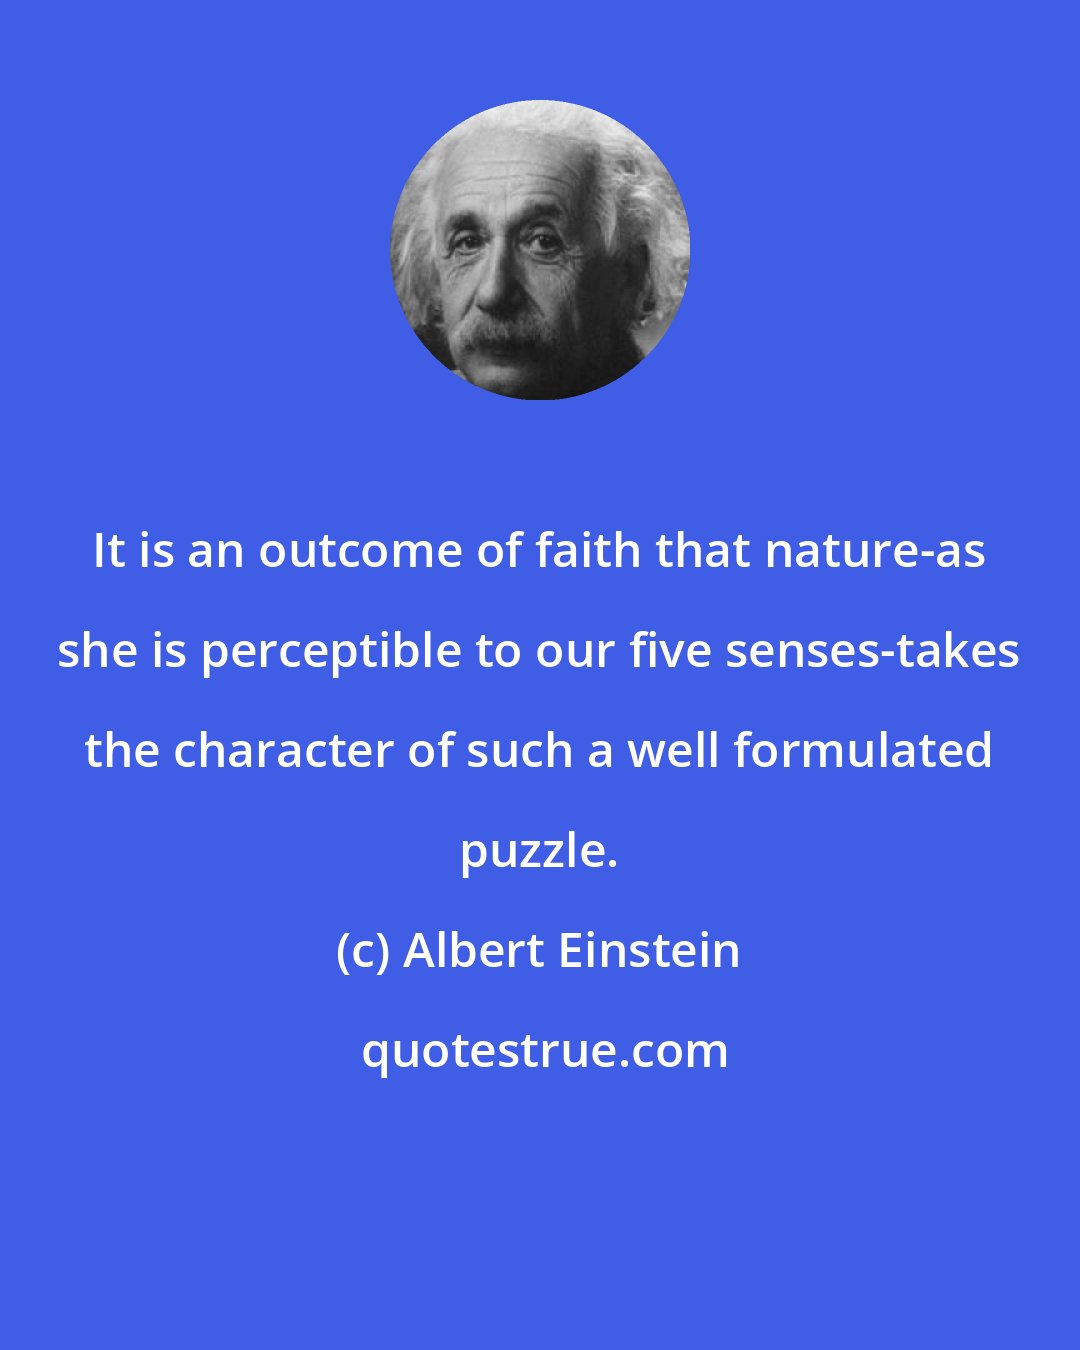 Albert Einstein: It is an outcome of faith that nature-as she is perceptible to our five senses-takes the character of such a well formulated puzzle.